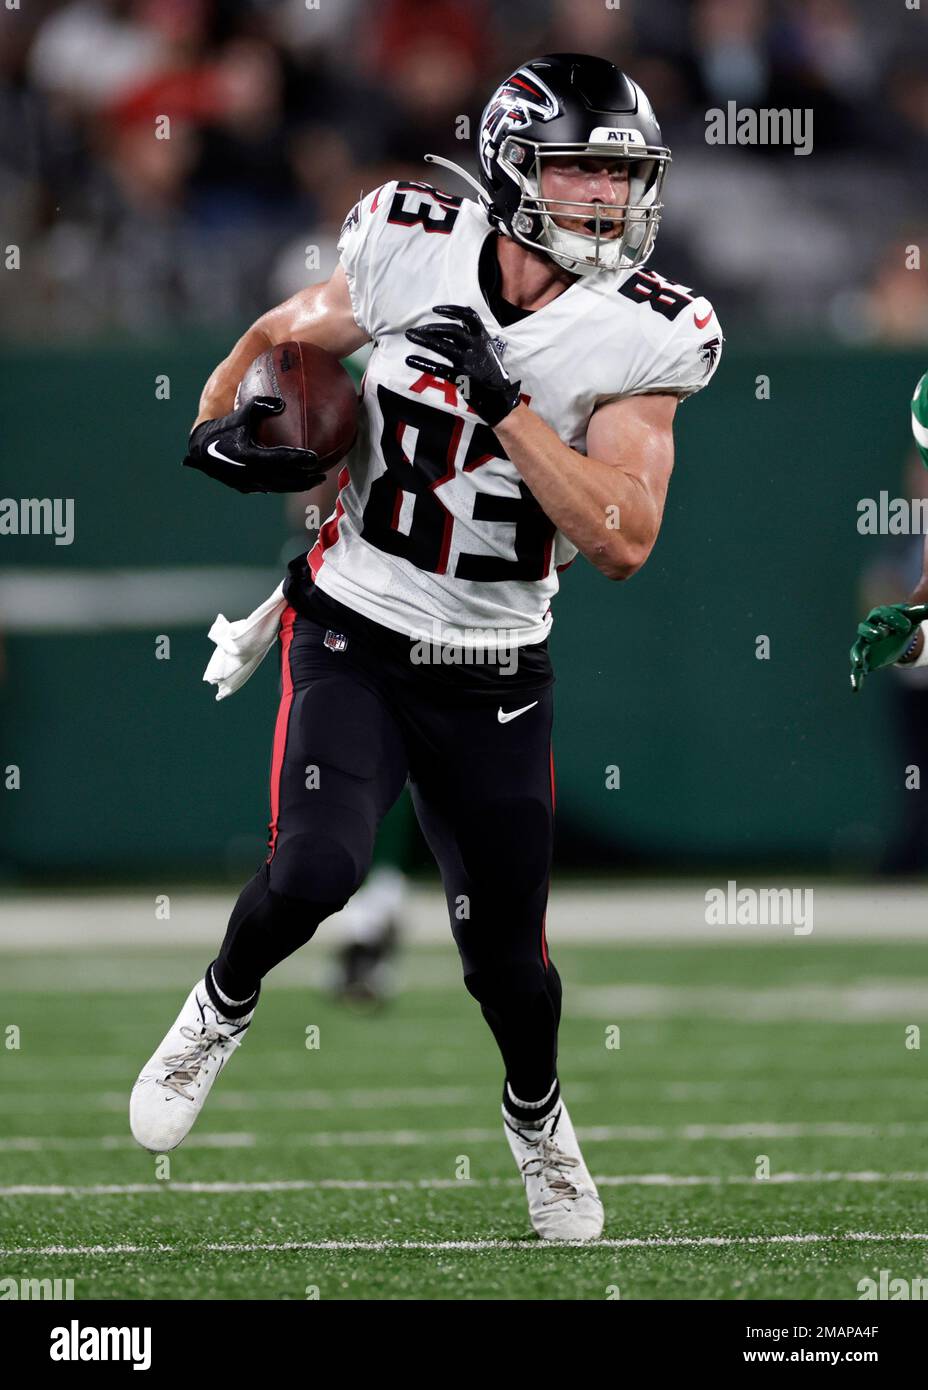 Atlanta Falcons wide receiver Jared Bernhardt (83) runs with the ball  against the New York Jets